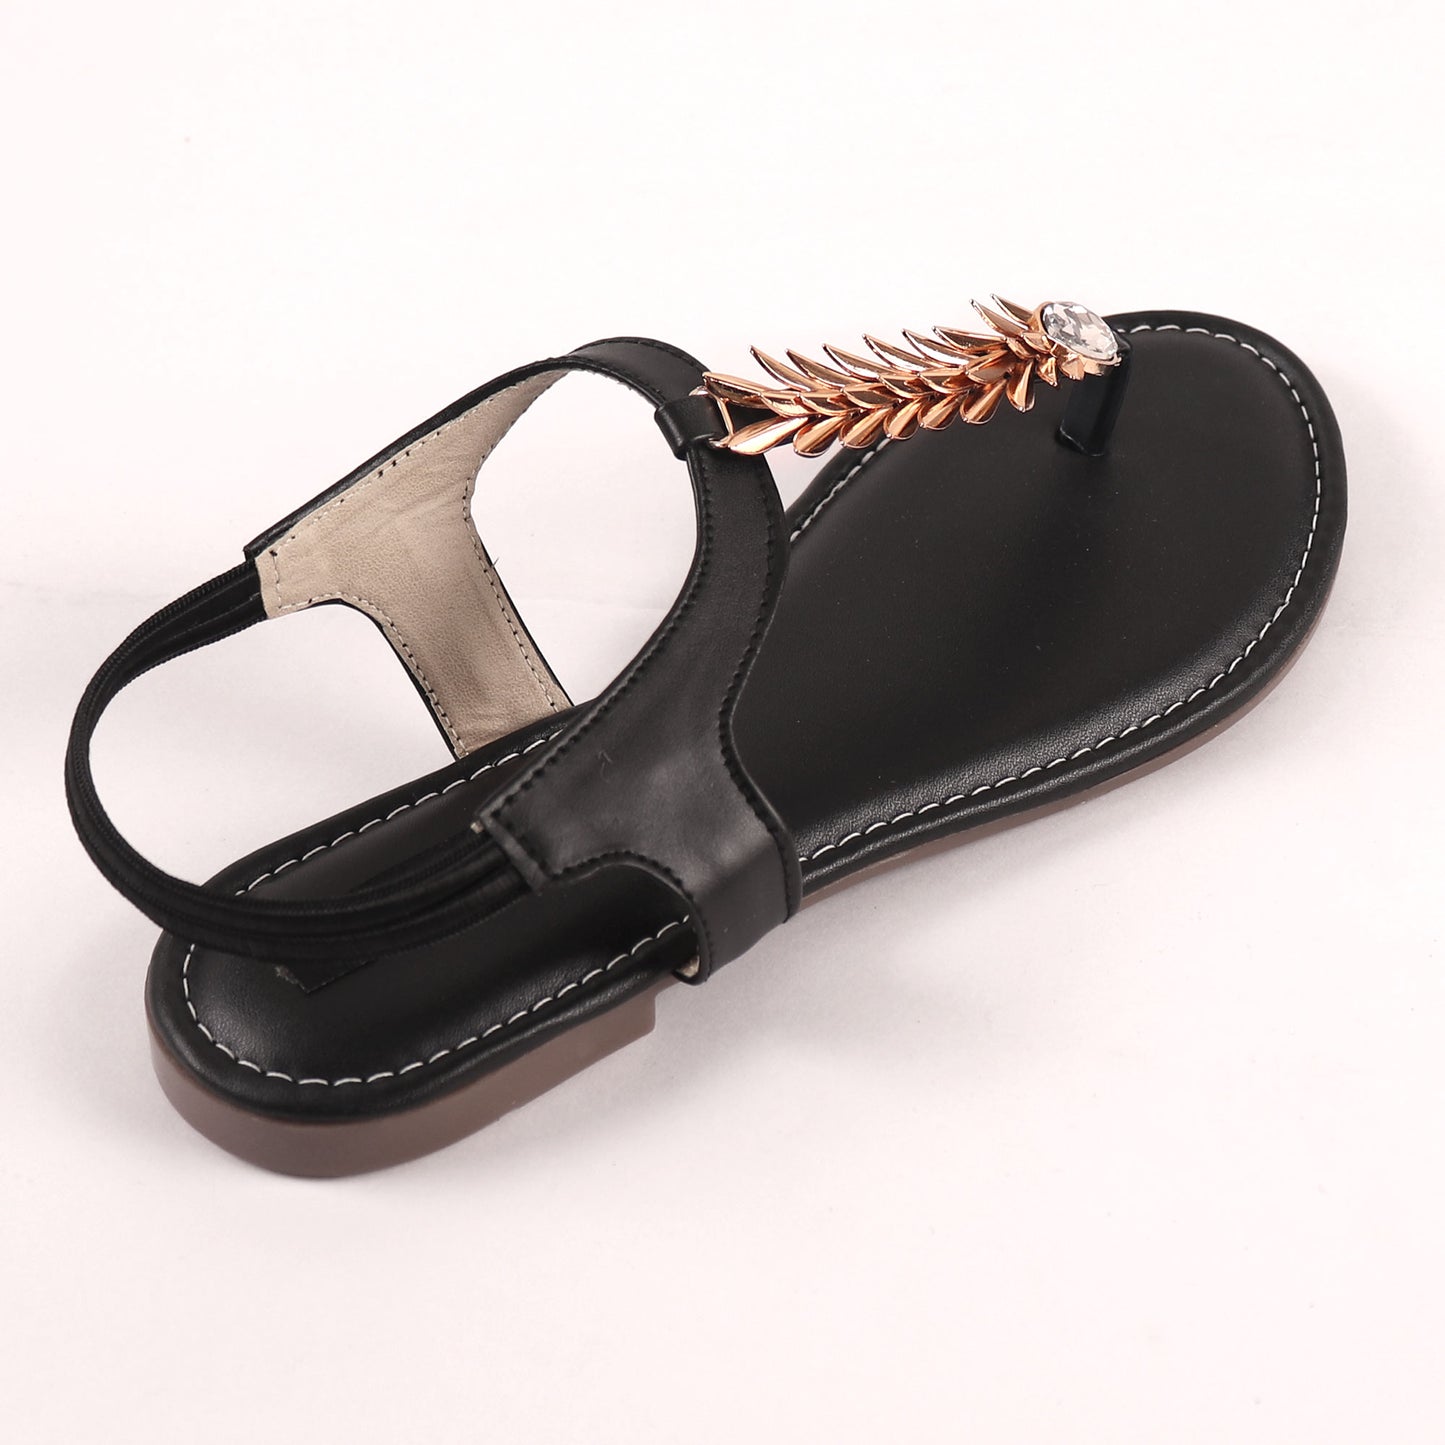 Foot Wear,The Palm Branch Flats in Black - Cippele Multi Store